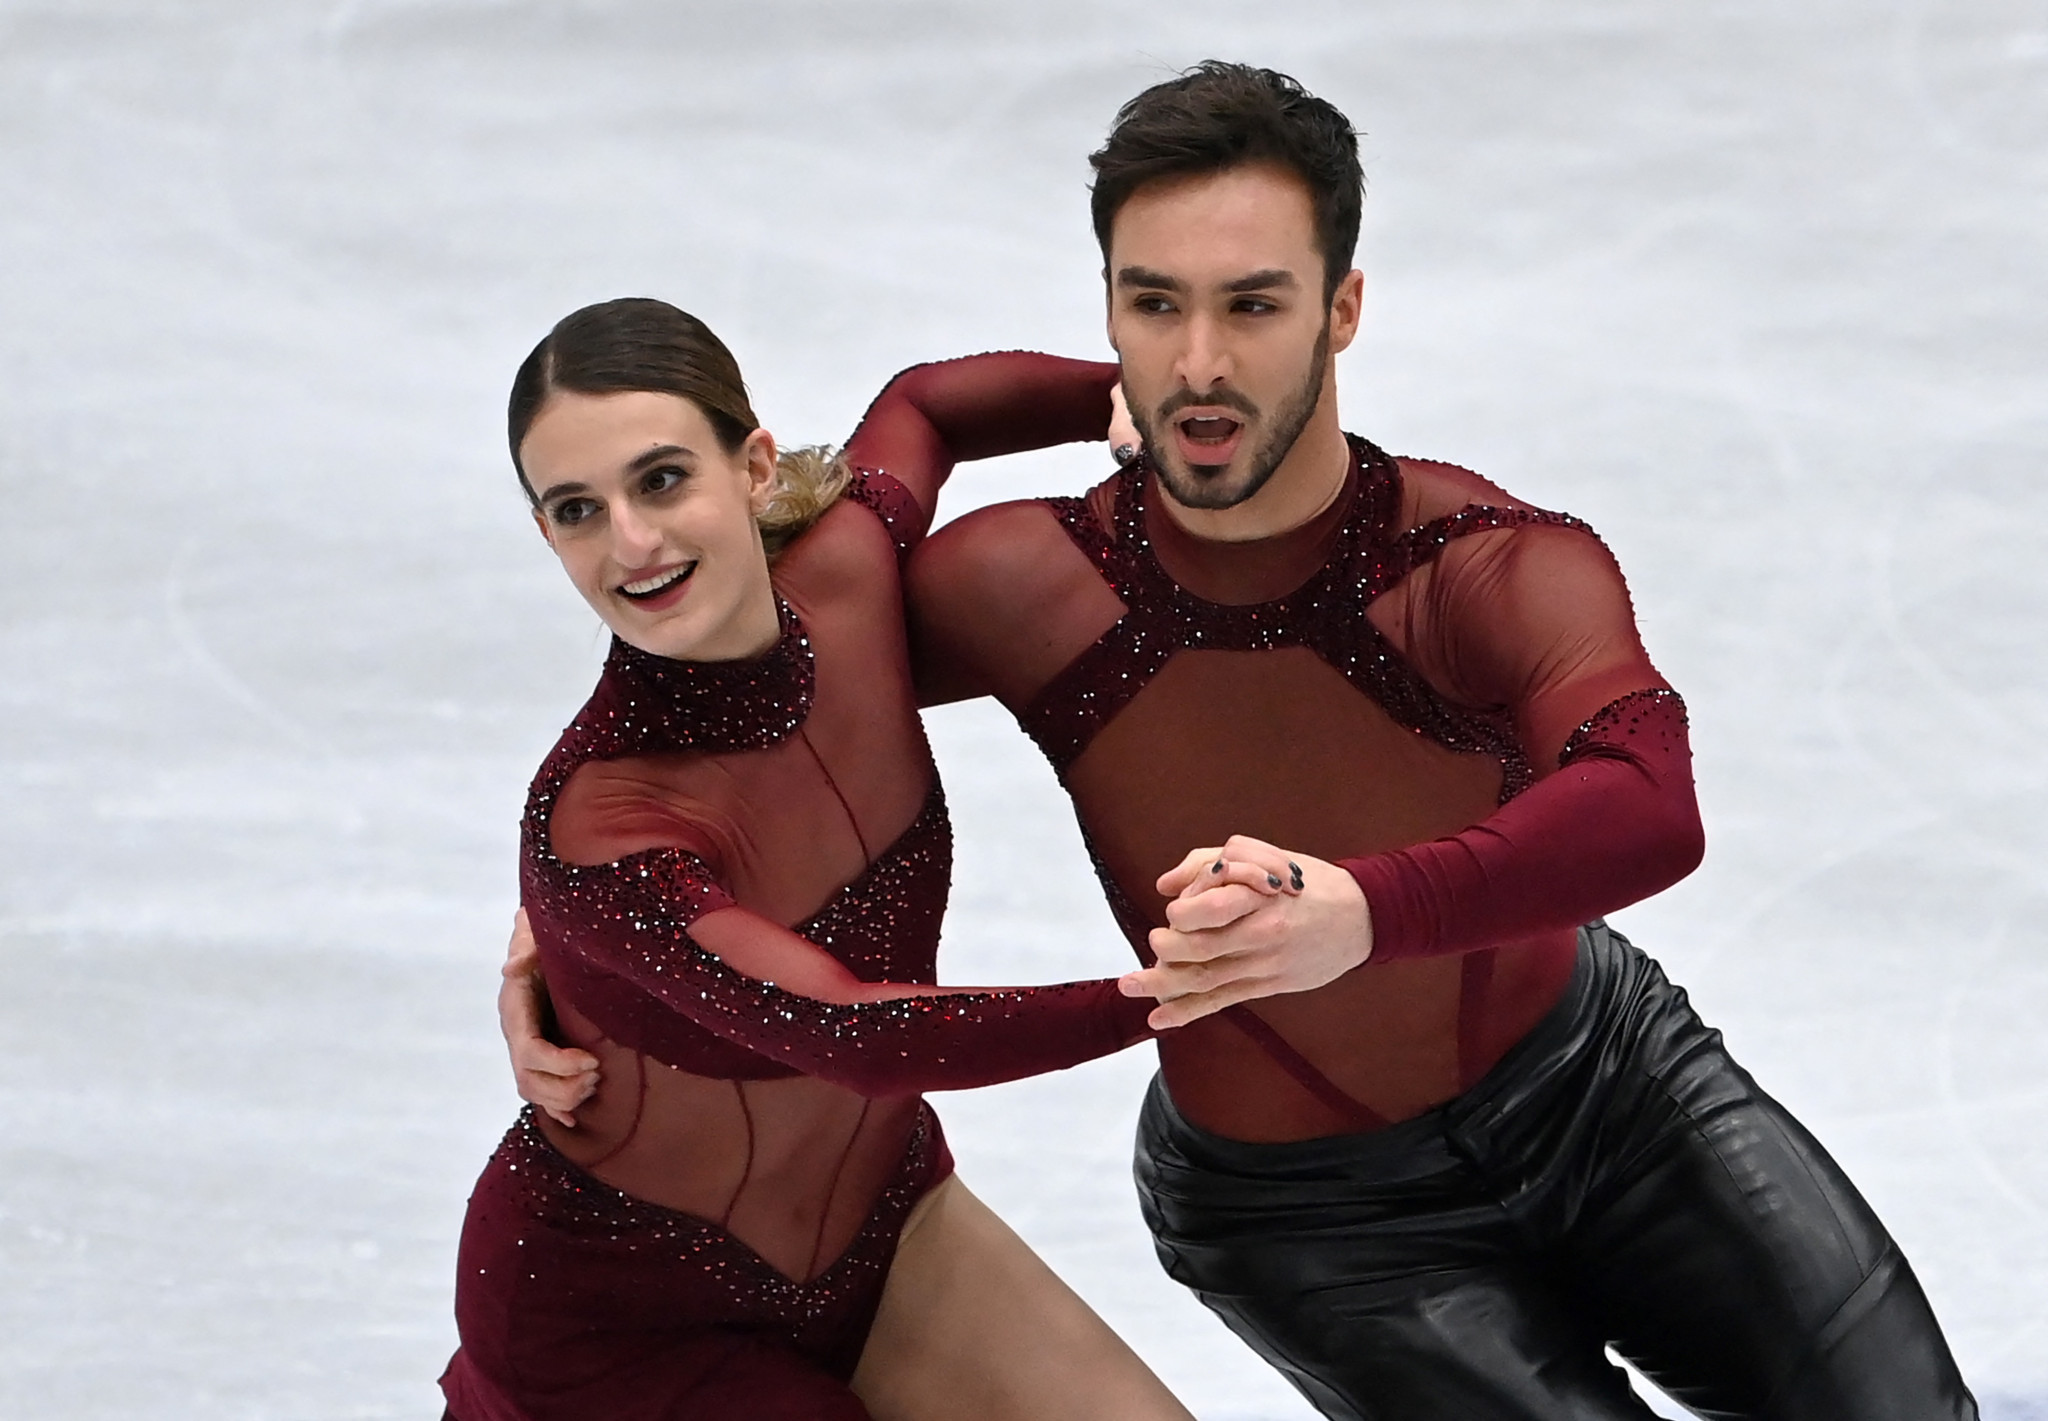 Gabriella Papadakis and Guillaume Cizeron claimed the rhythm dance title today in France ©Getty Images